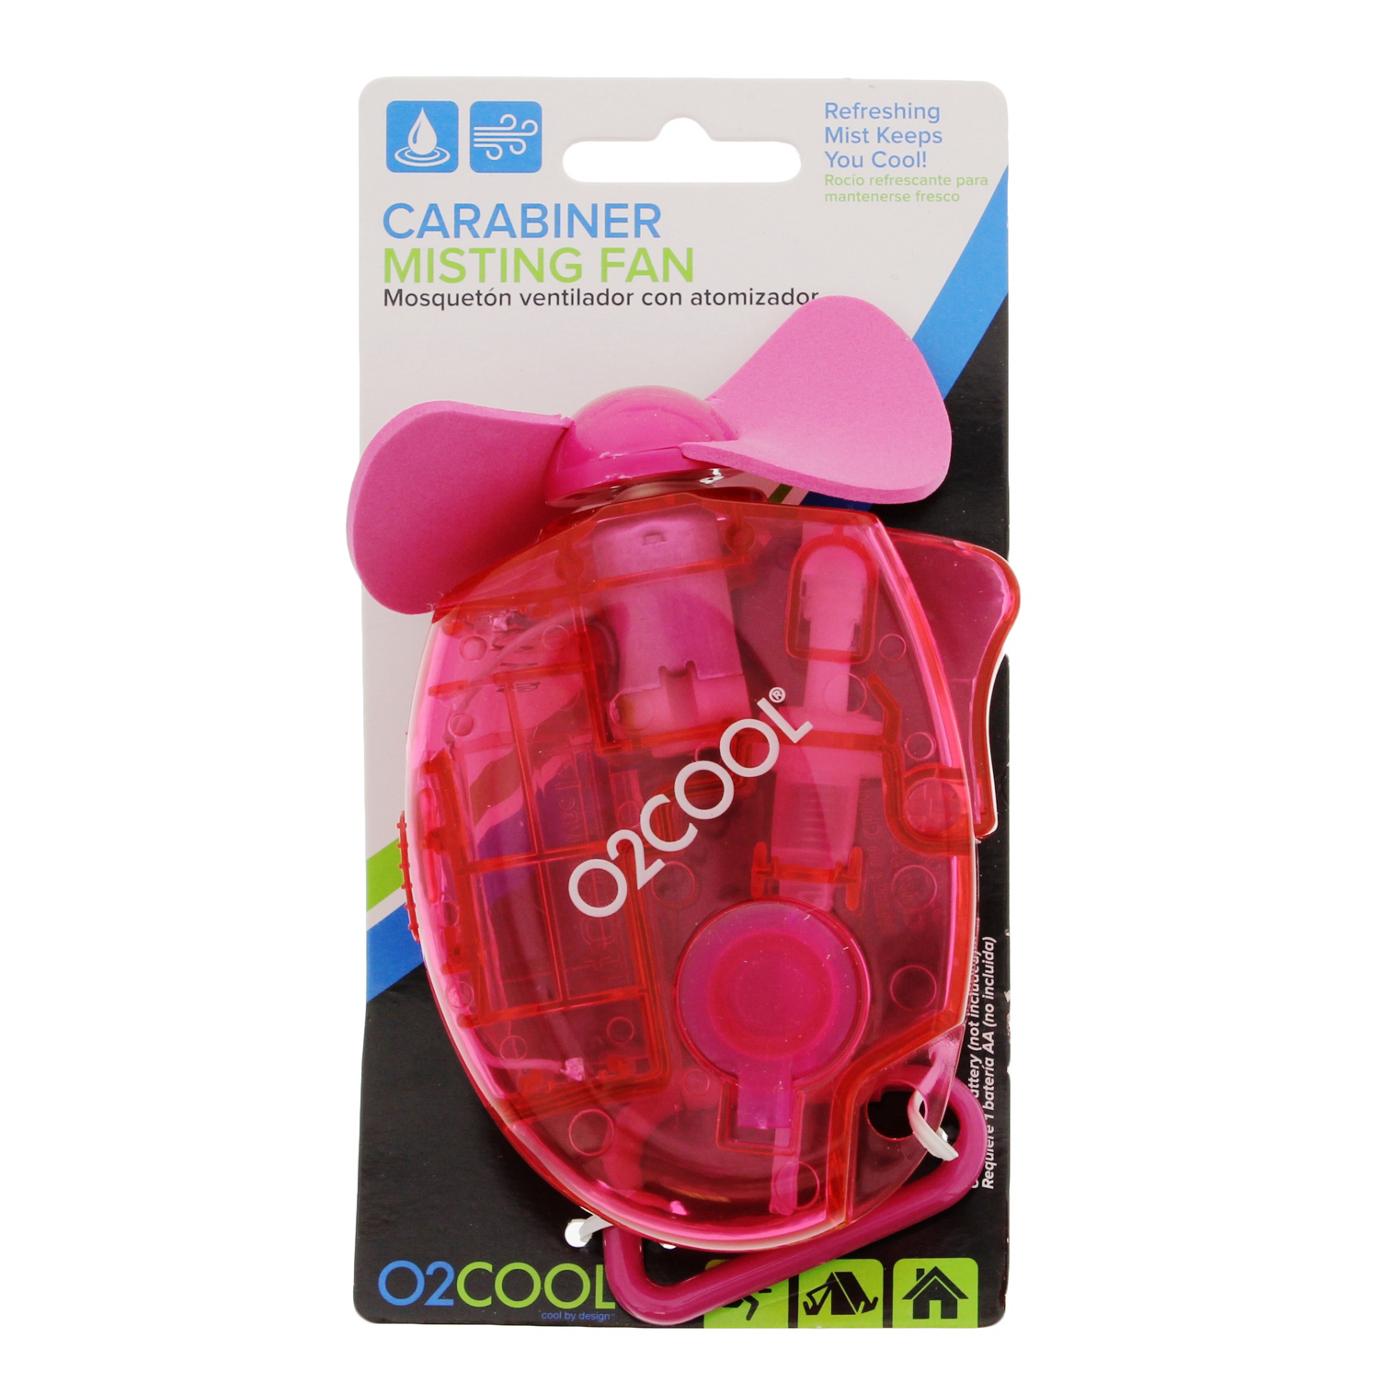 02COOL Carabiner Misting Fan, Assorted Colors; image 2 of 4